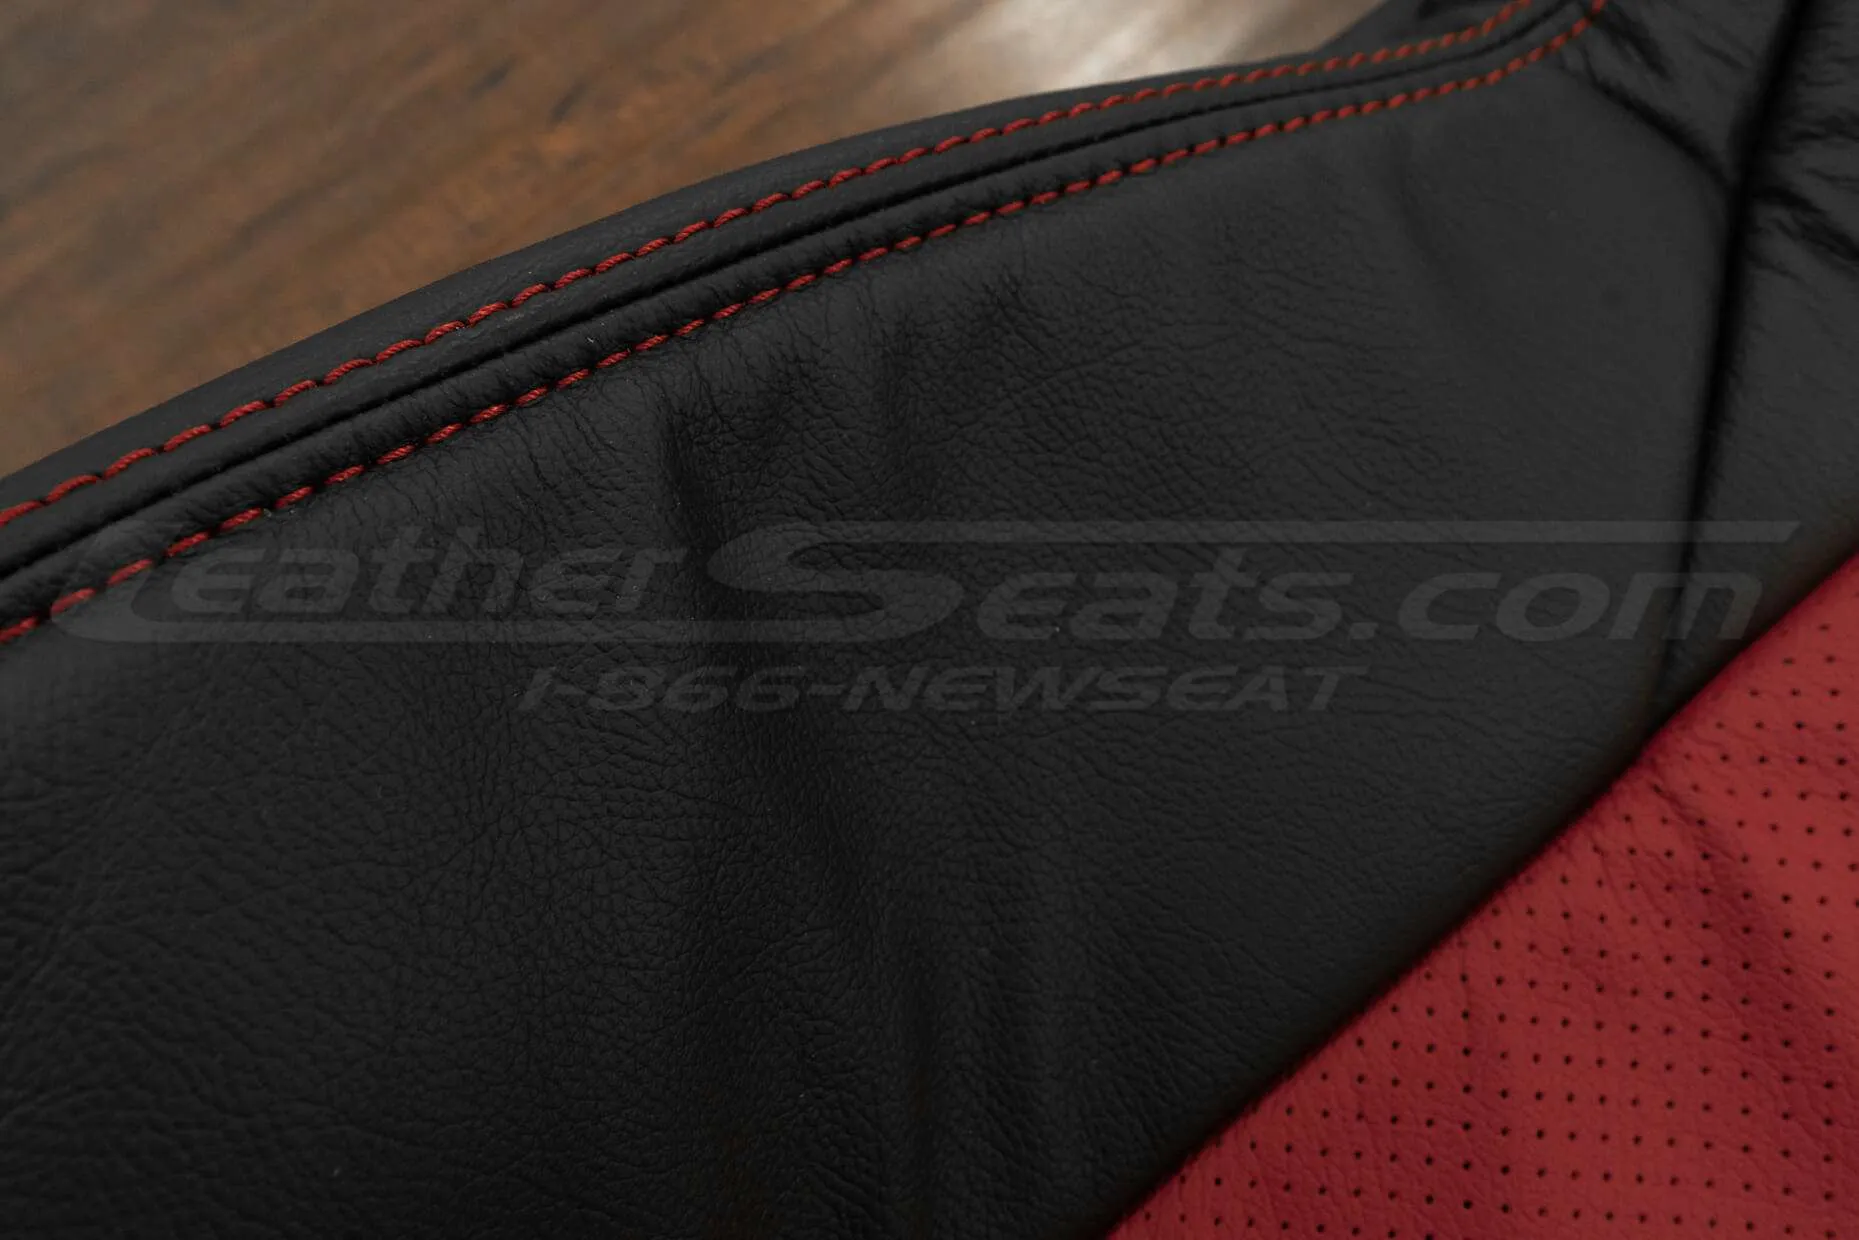 Red side double-stitching